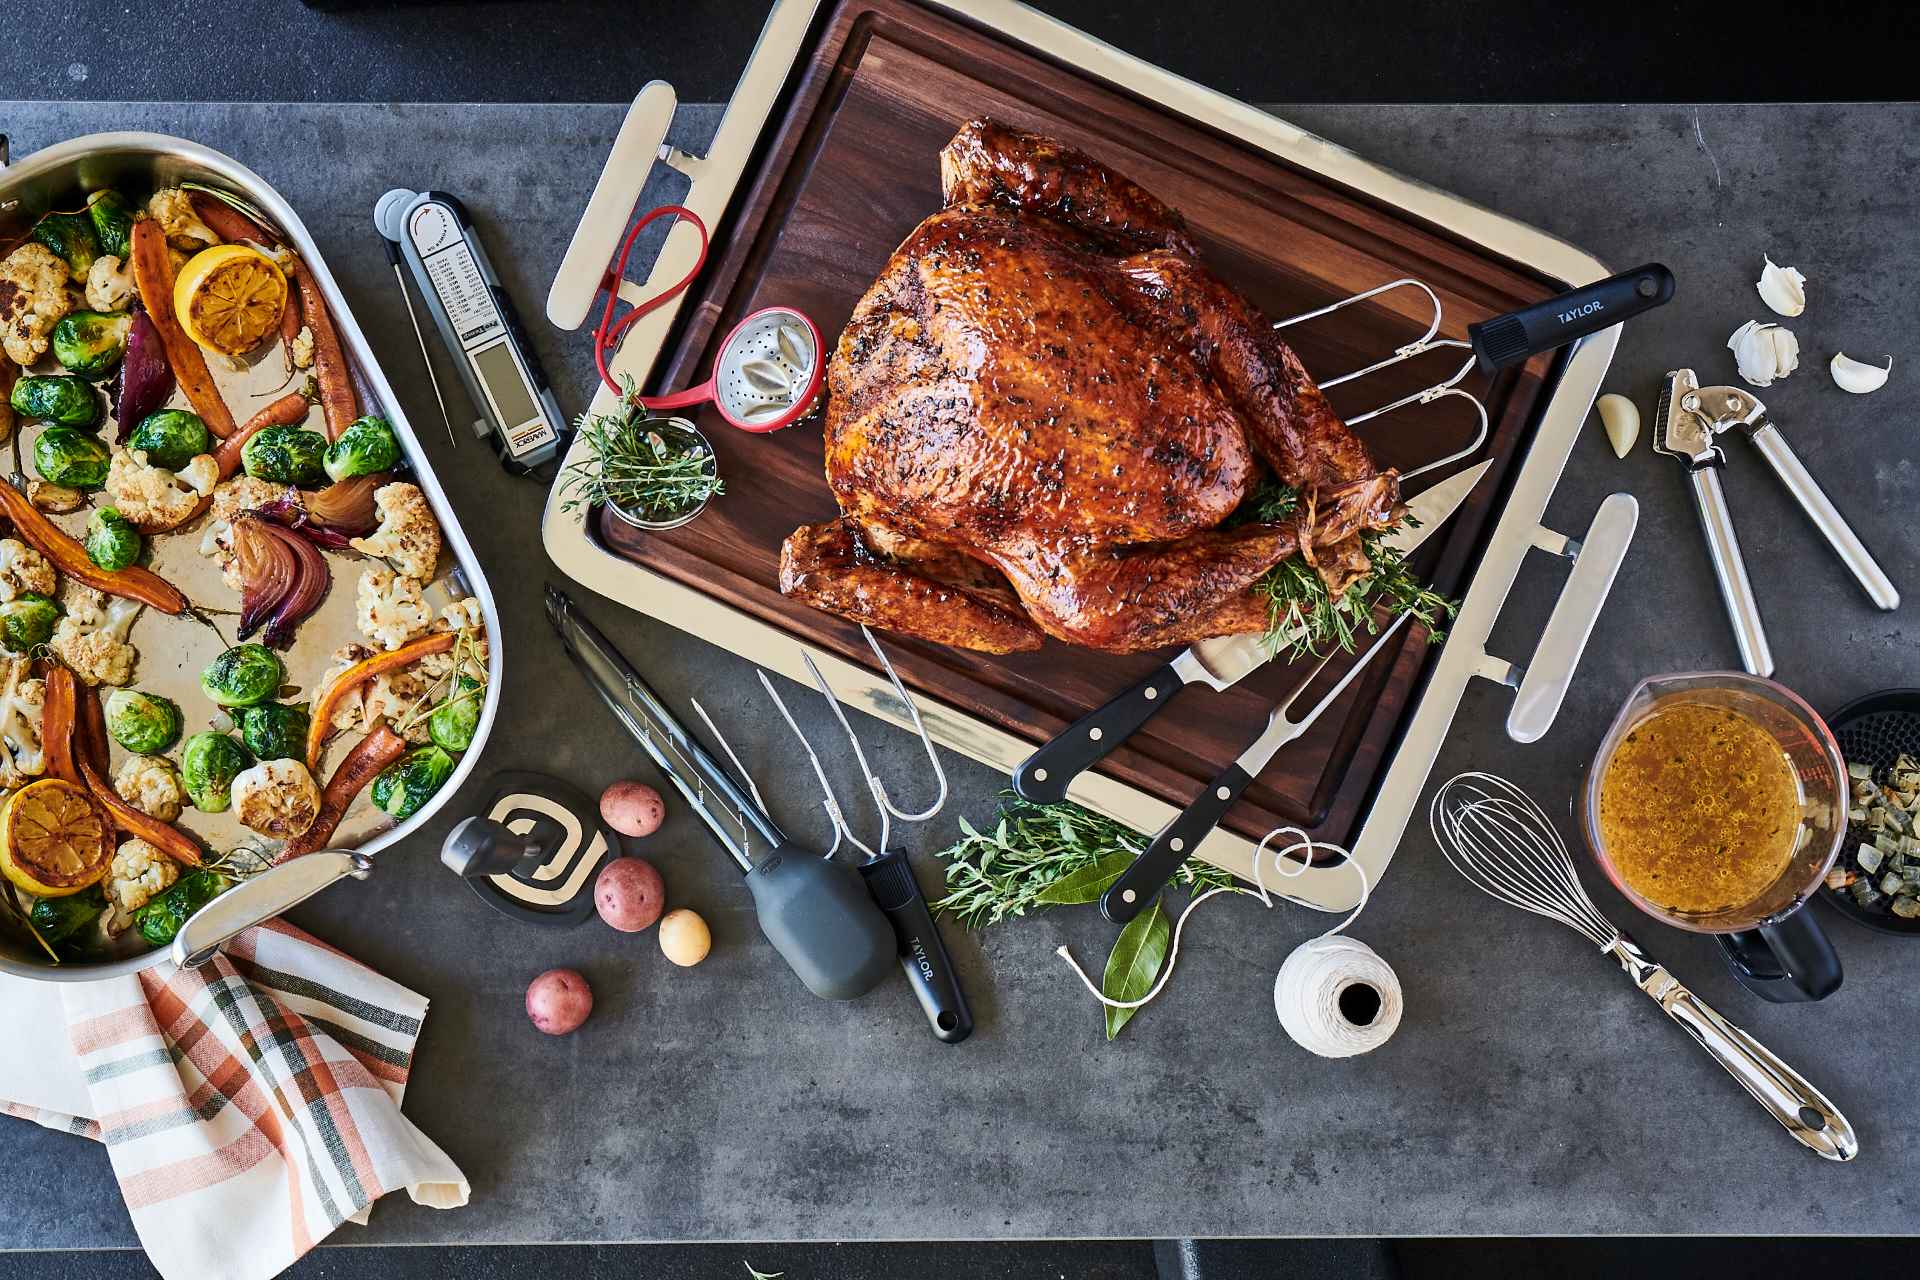 7 Questions to Help You Plan Your Thanksgiving Dinner